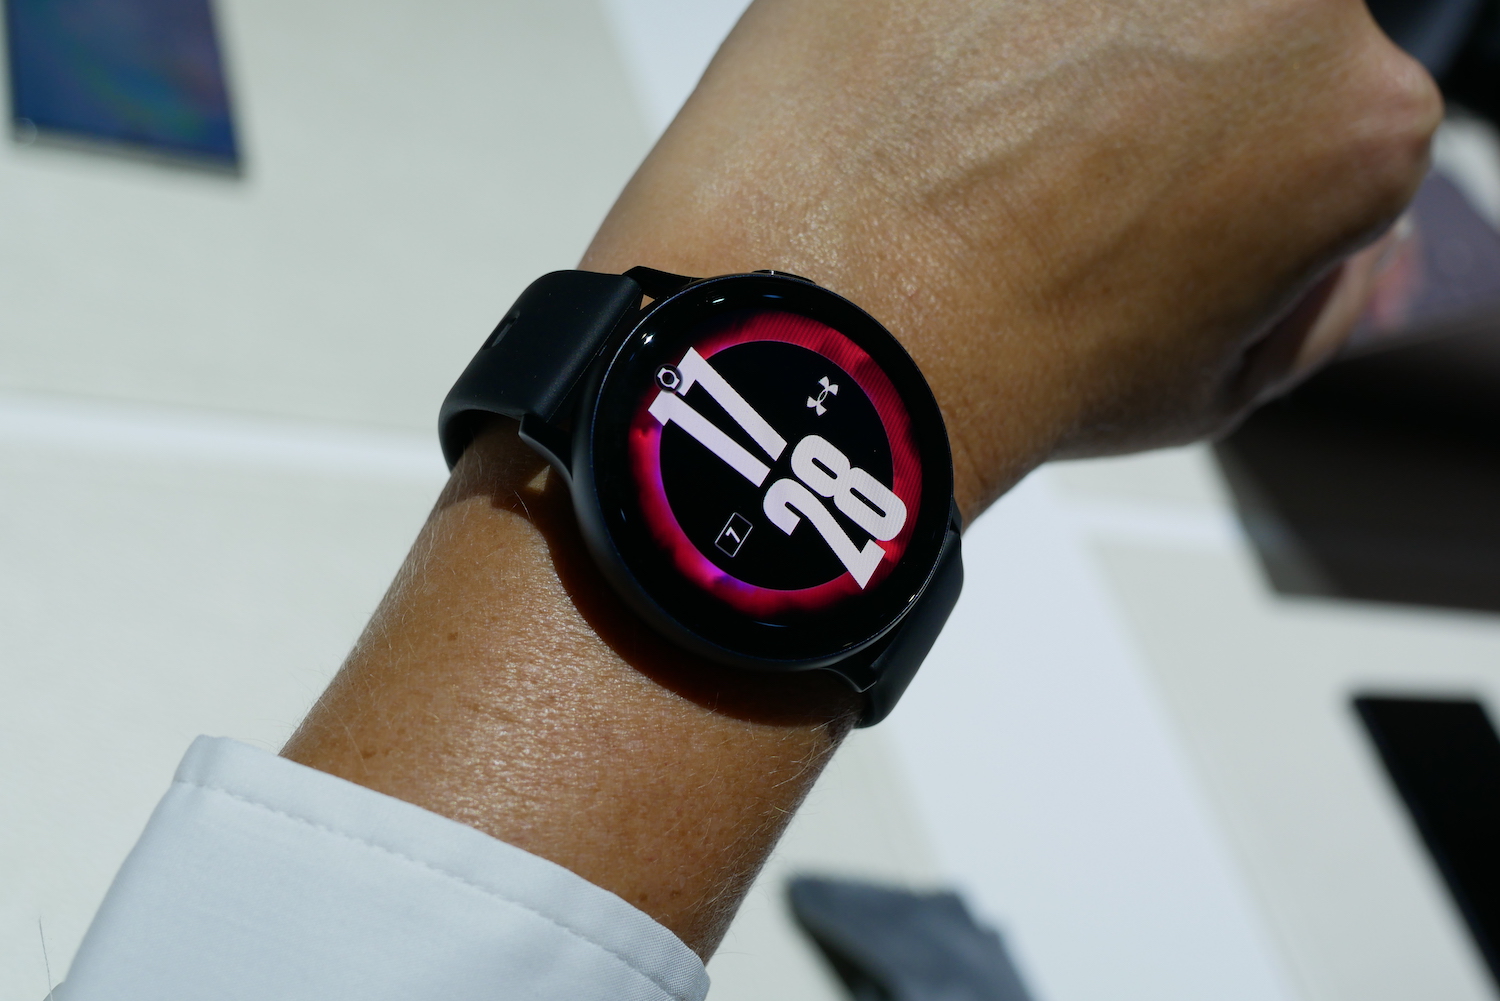 Samsung Watch Active 2 Under Armour Edition Is Meant for HOVR Fans